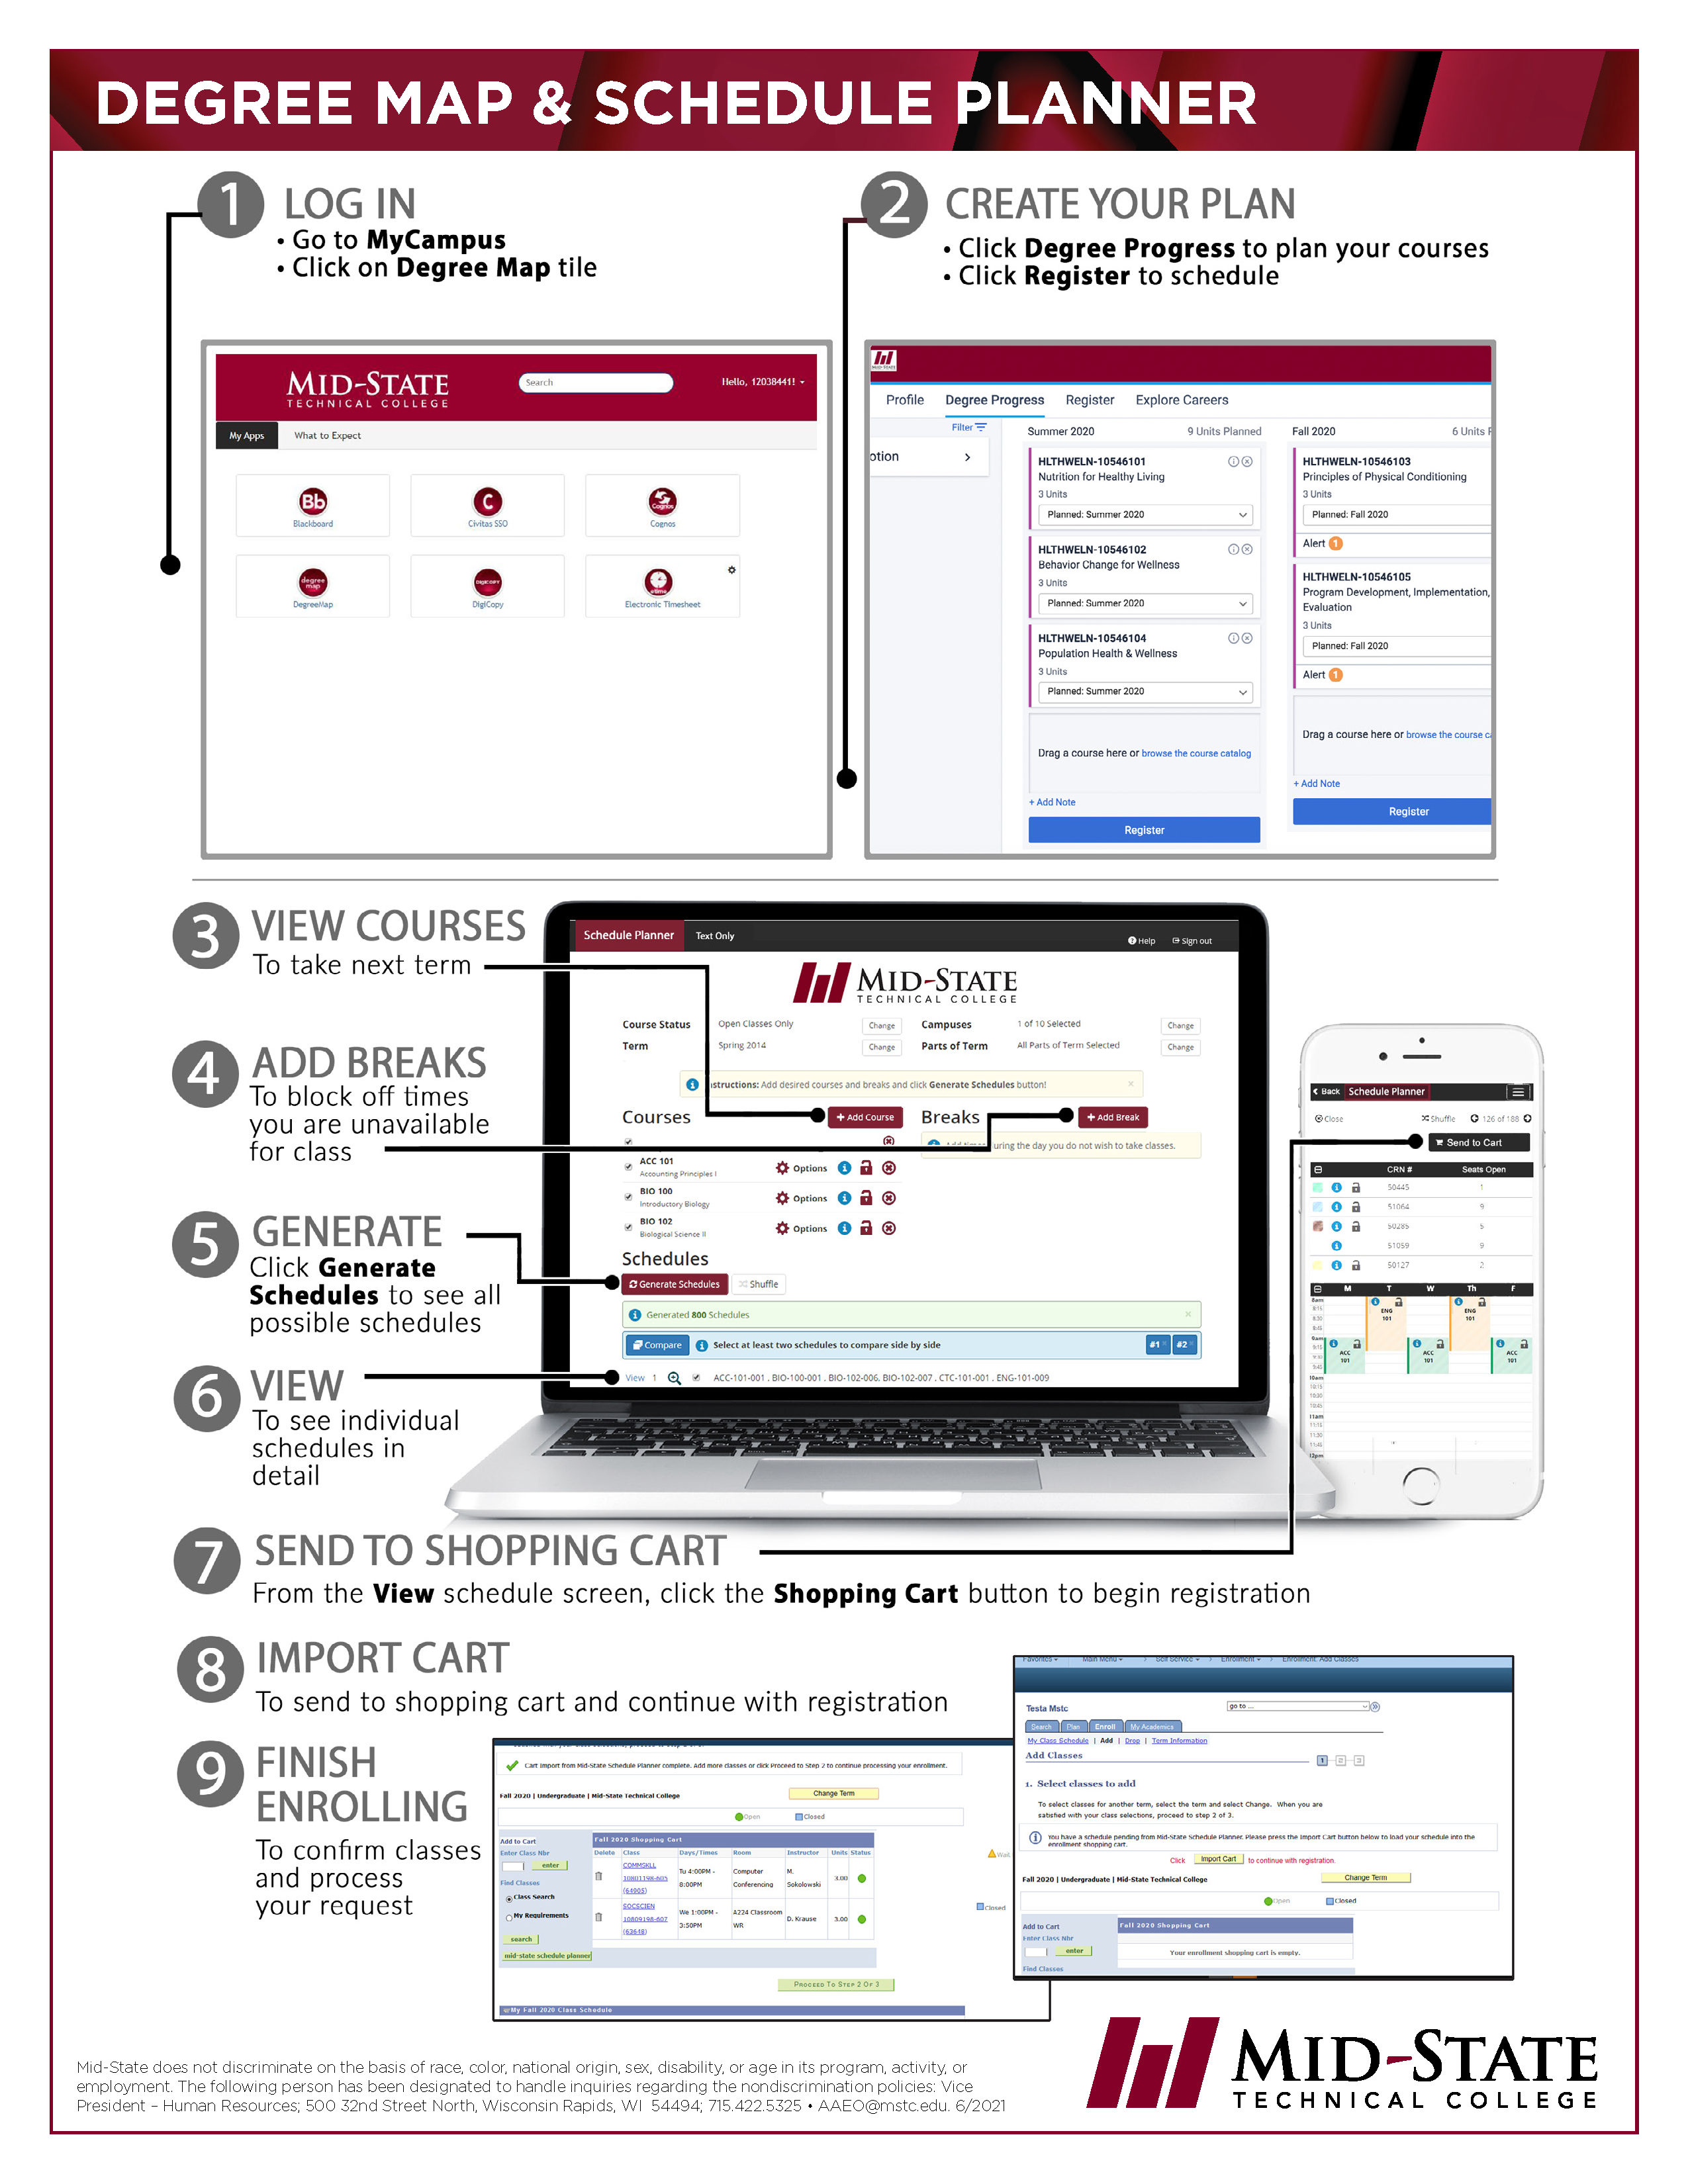 Log in to mycampus to access schedule planner